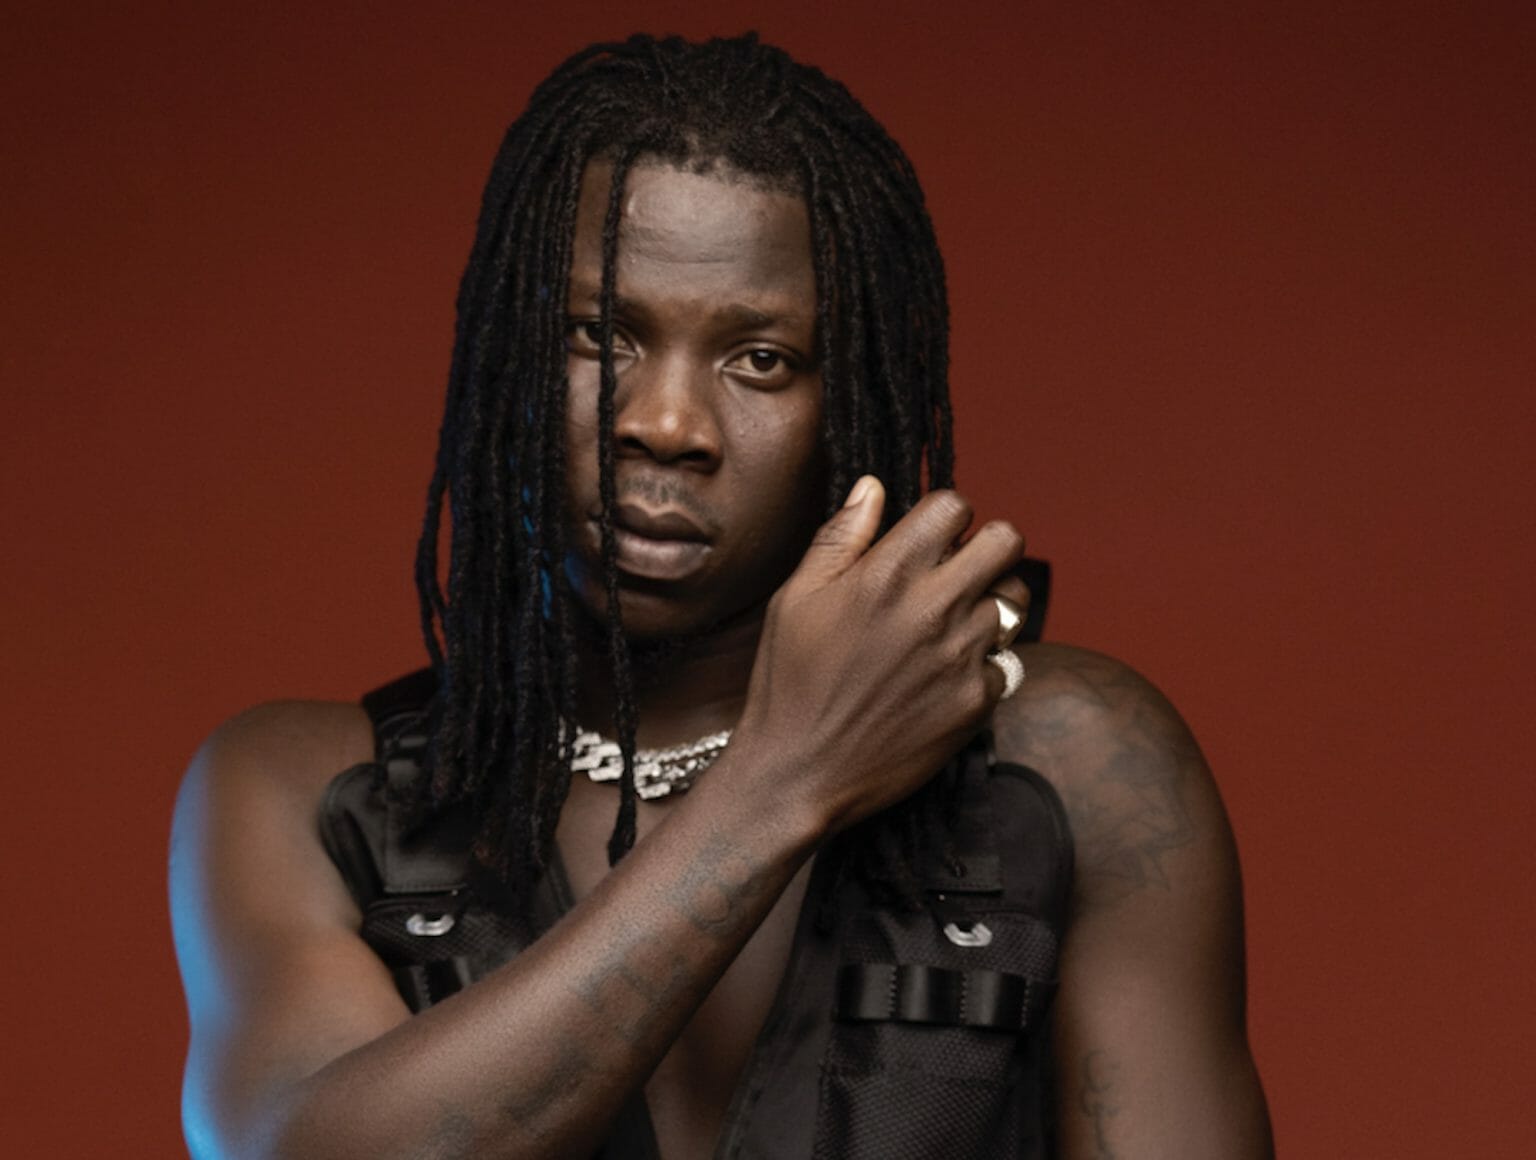 Stonebwoy Blasts VGMA For Lifting His Ban Without His Consent